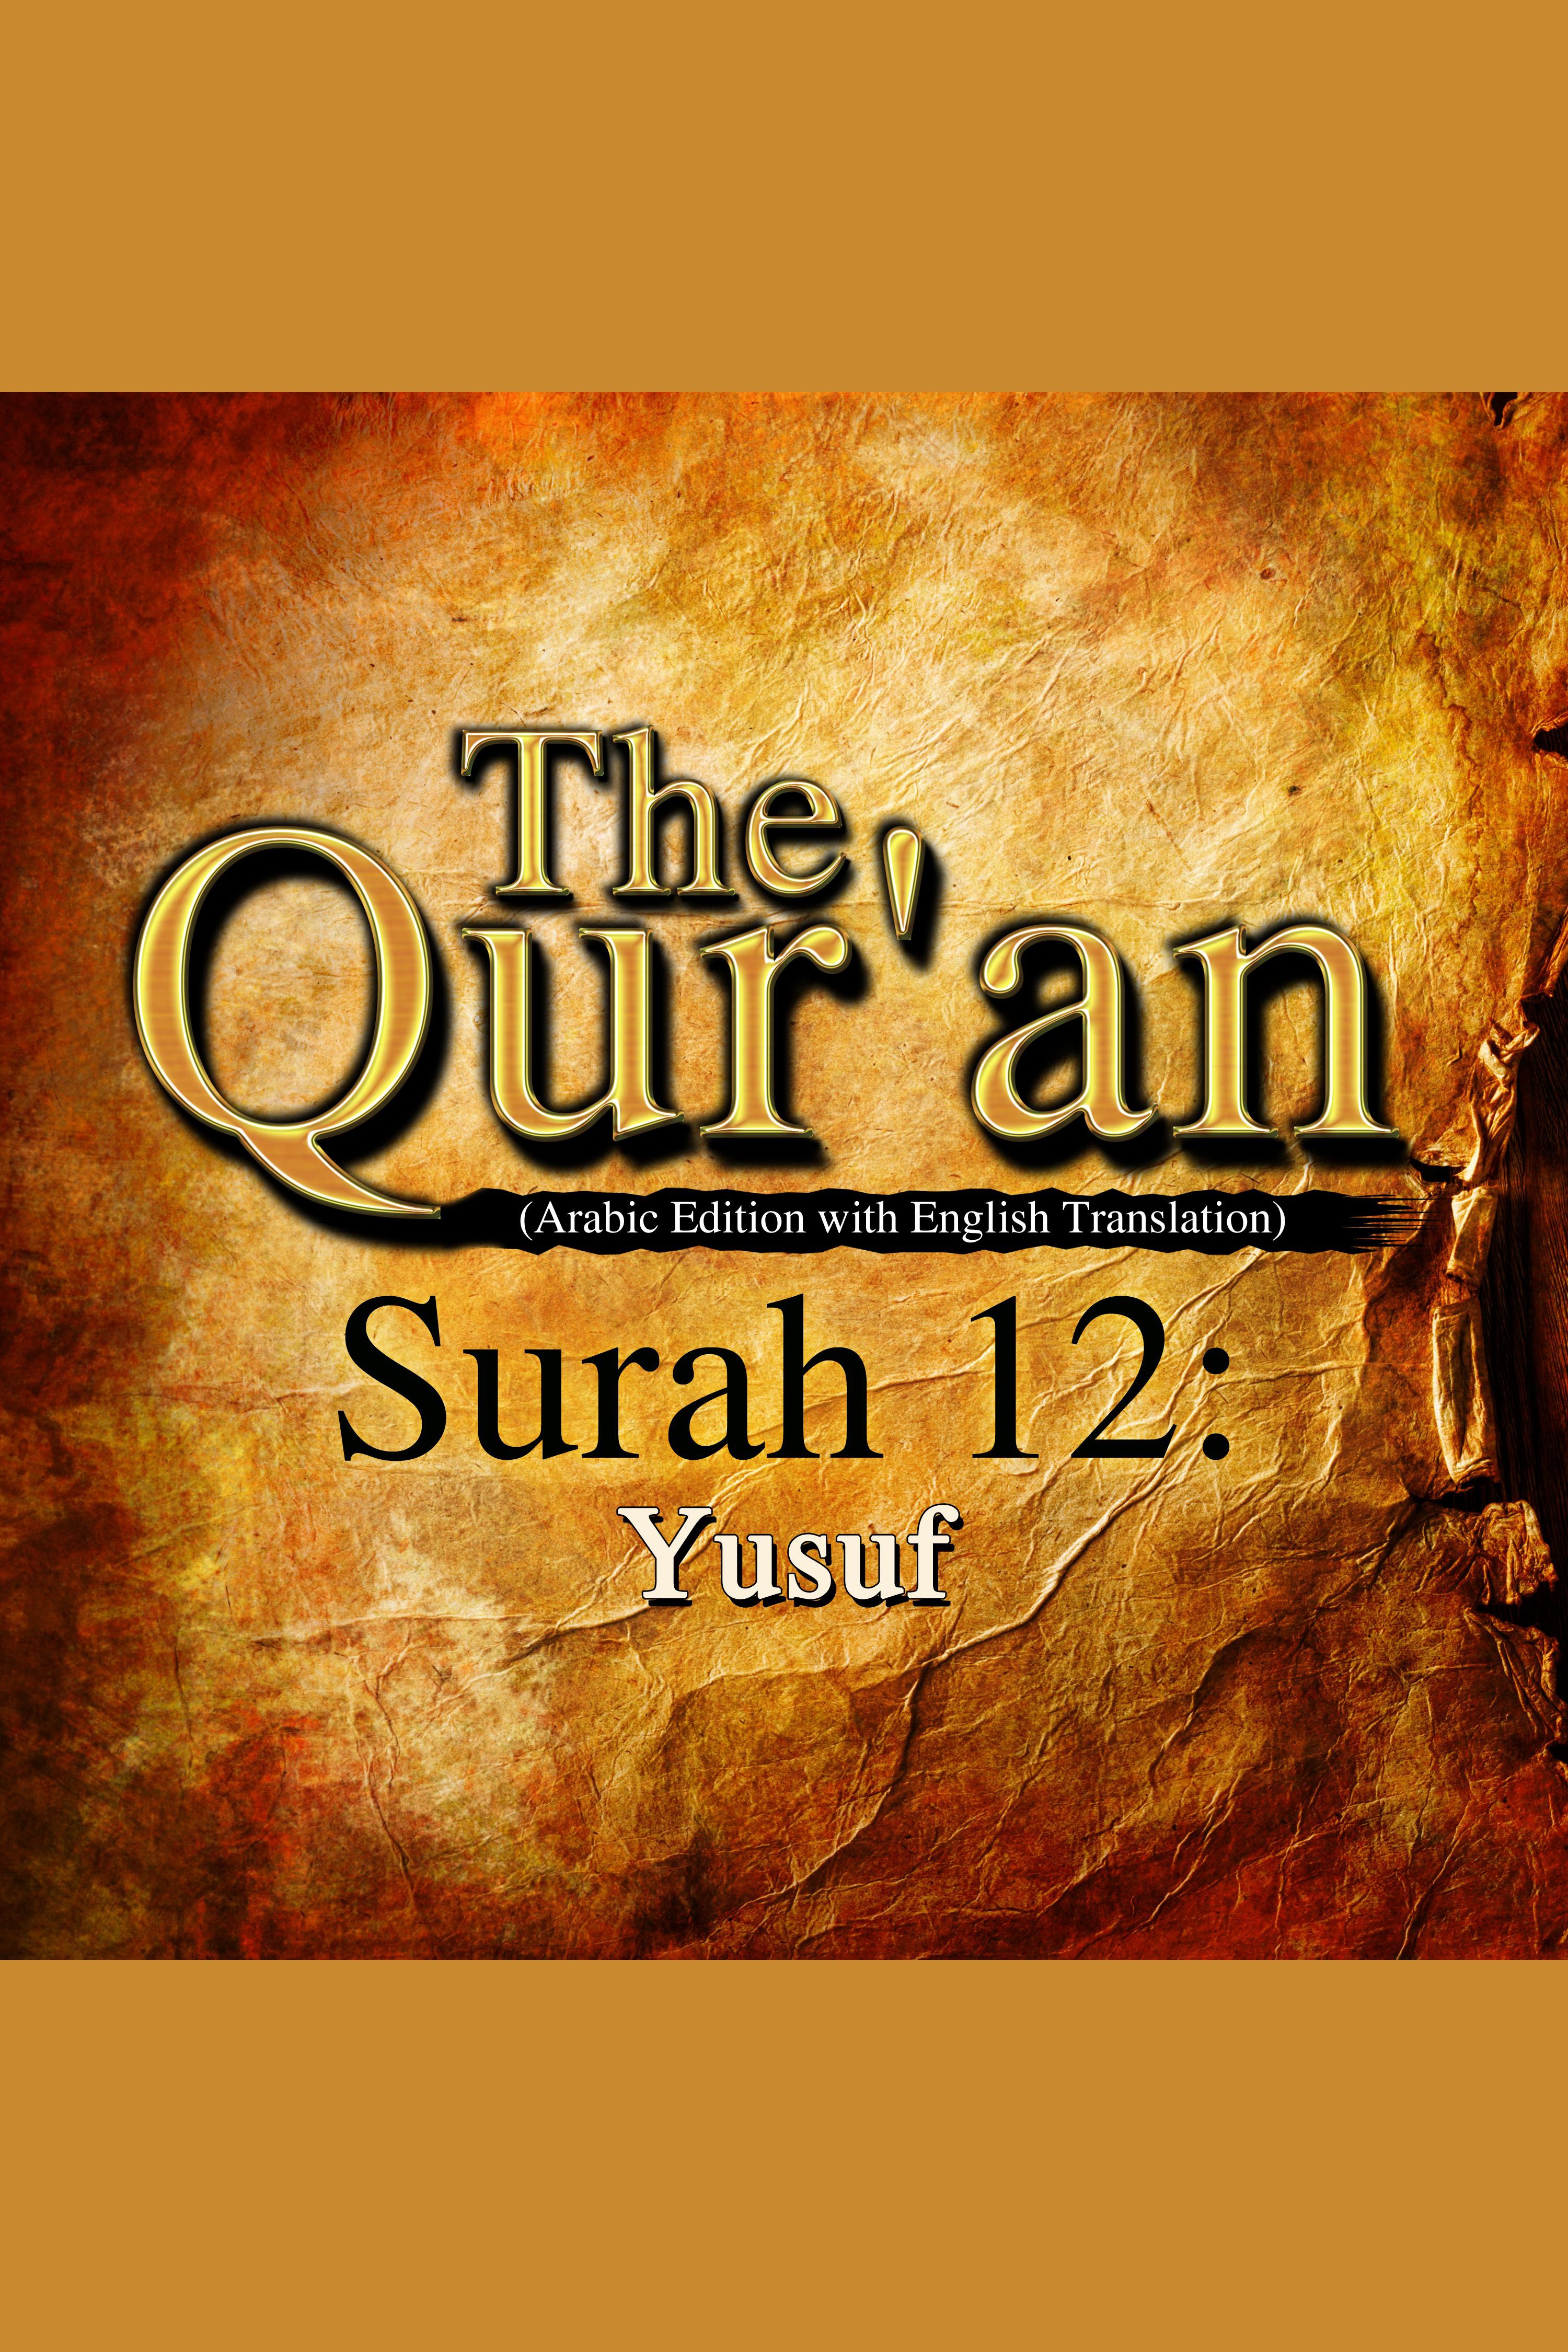 The Qur'an - Surah 12 - Yusuf cover image